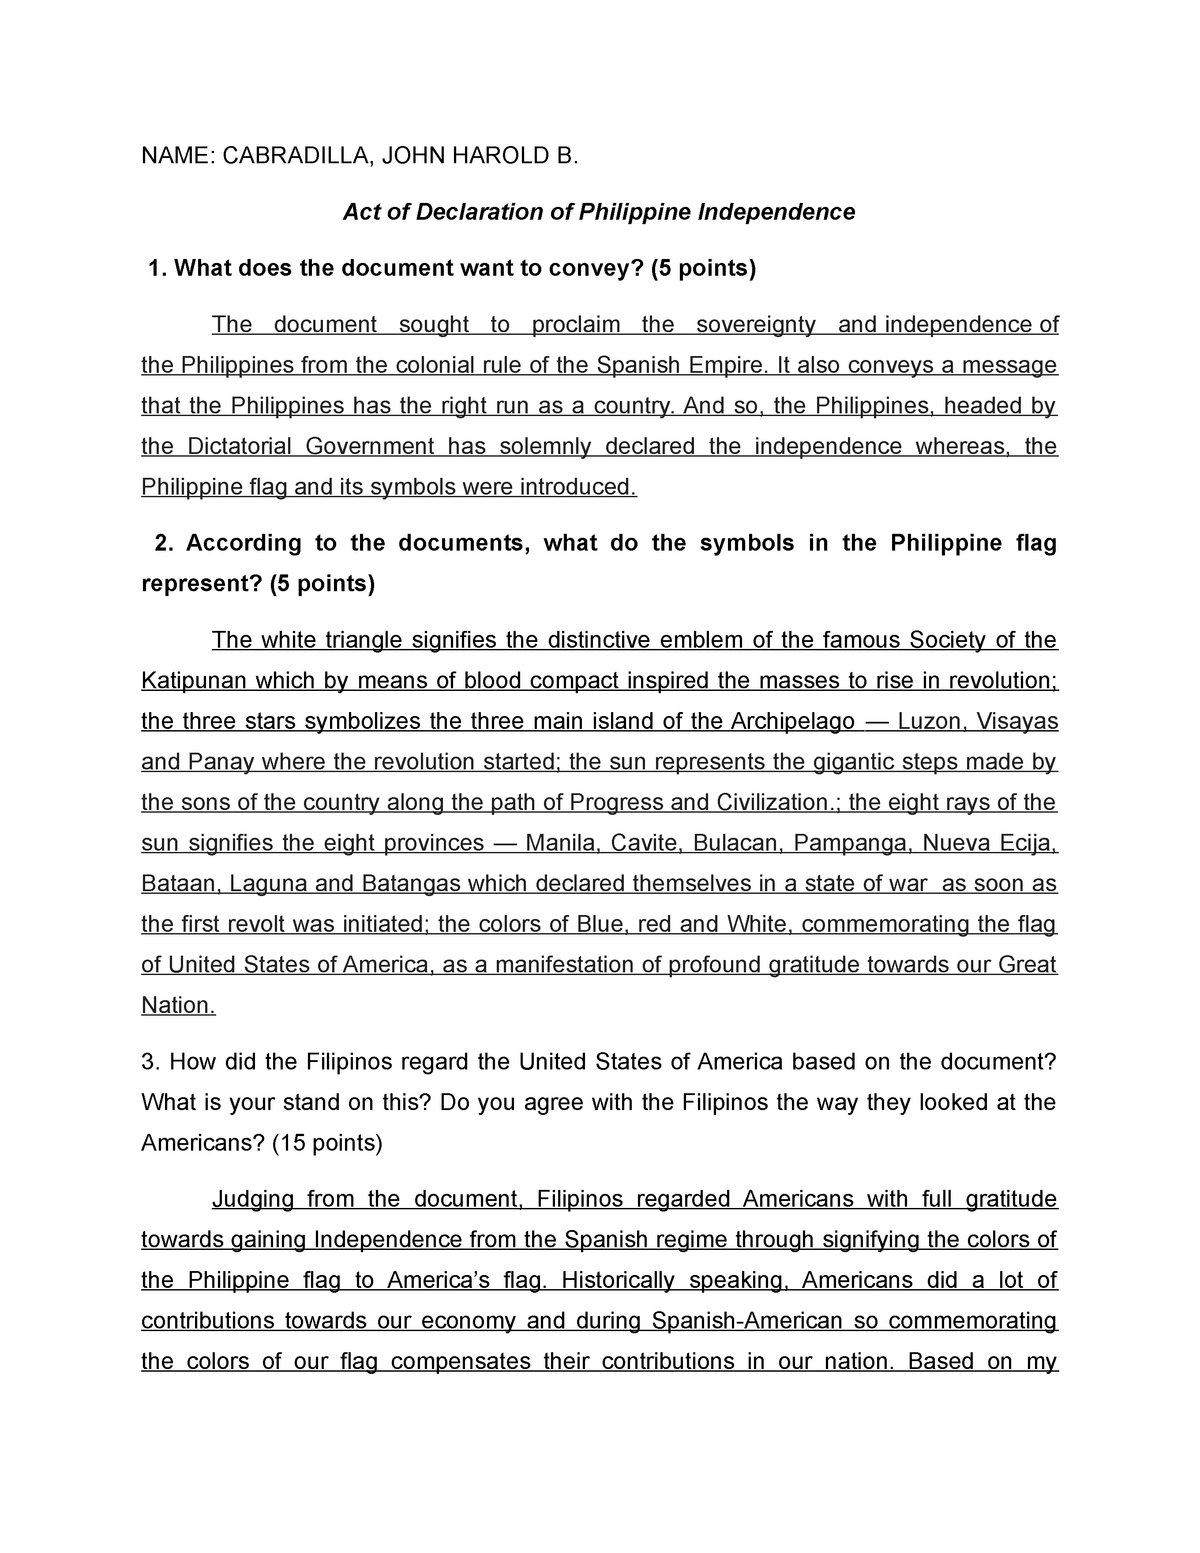 reflective essay on the proclamation of the philippine independence